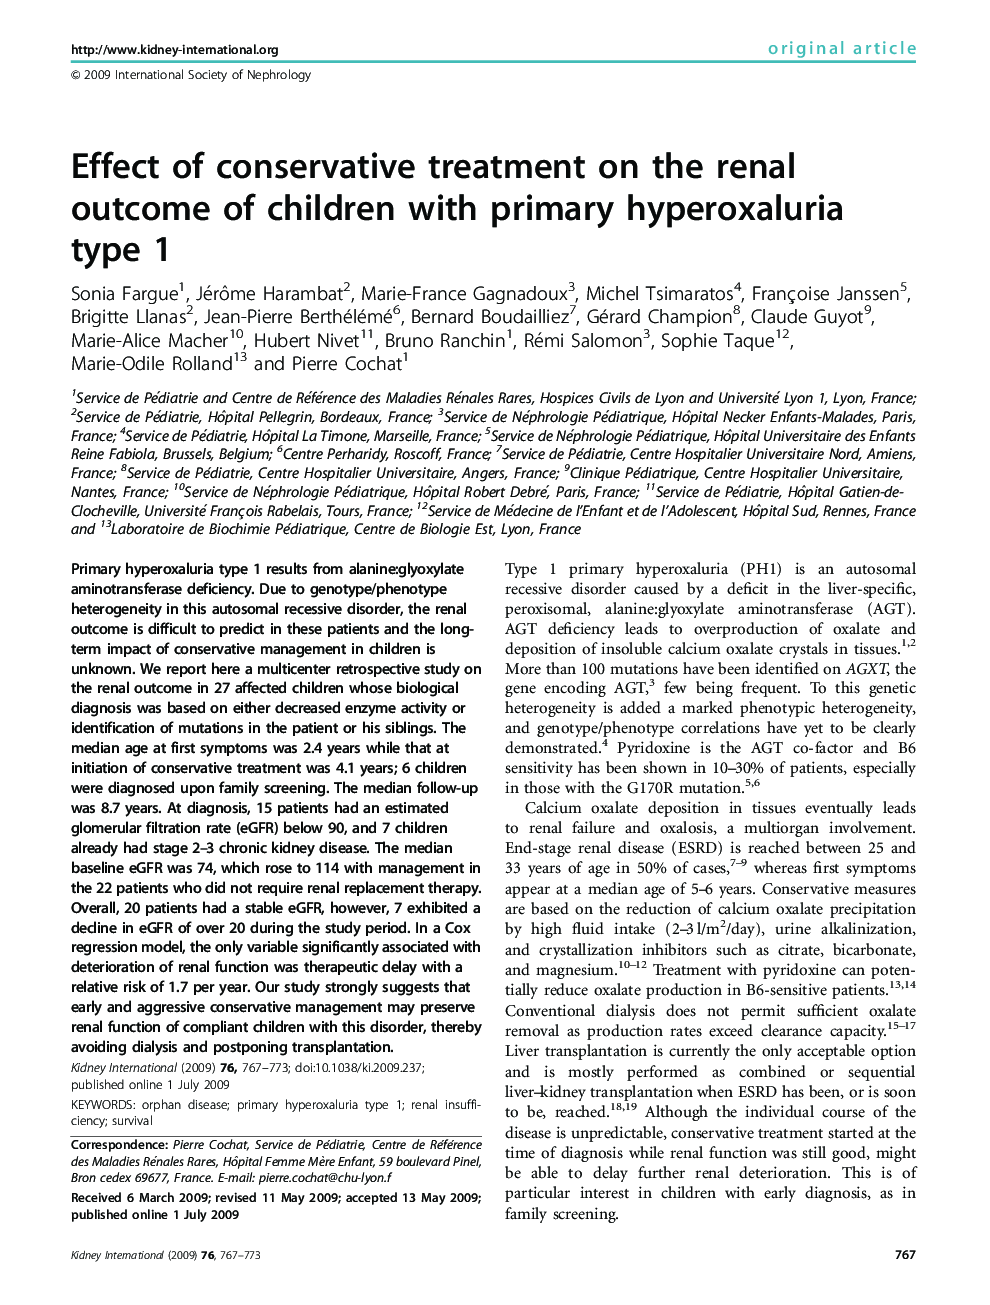 Effect of conservative treatment on the renal outcome of children with primary hyperoxaluria type 1